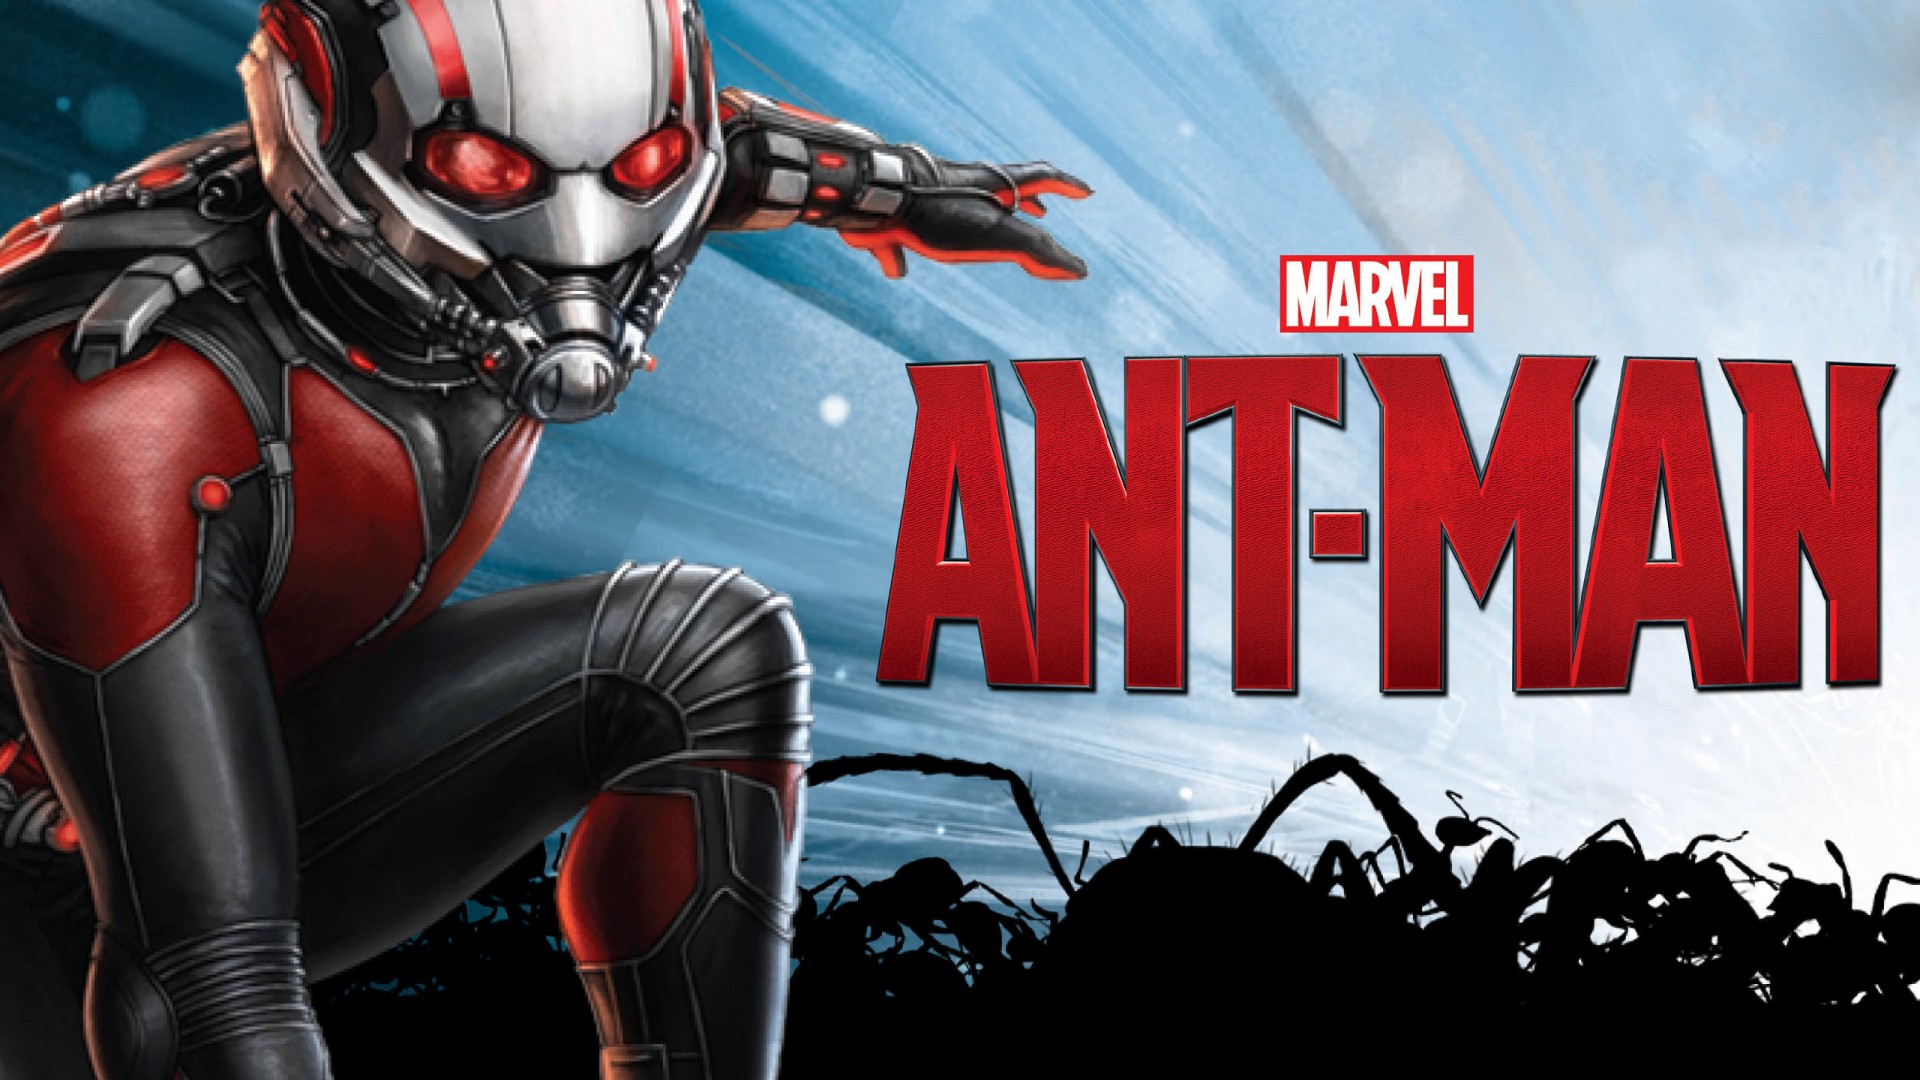 Marvel Ant Man 2015 Movie Poster HD Wallpaper   Stylish HD Wallpapers